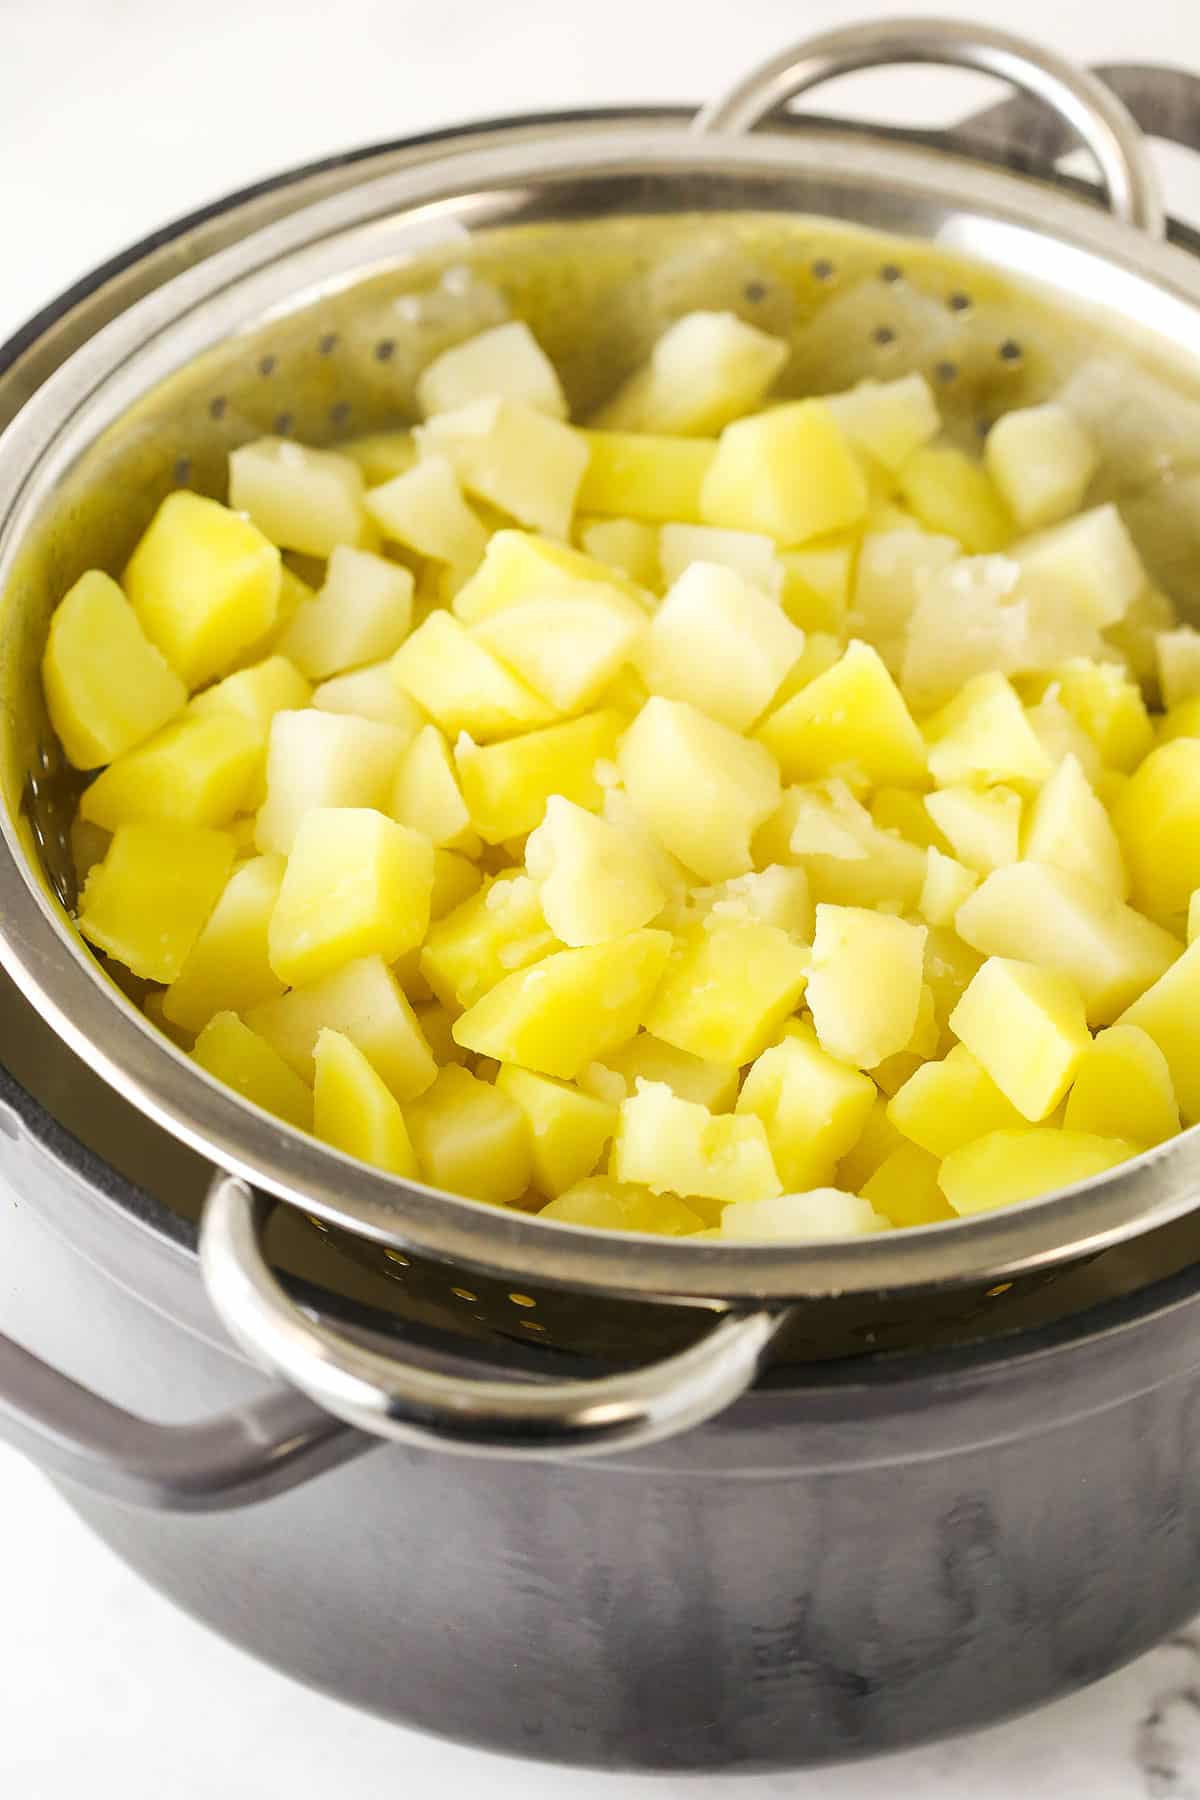 Step 2 drain the water from the chopped potatoes in a colander